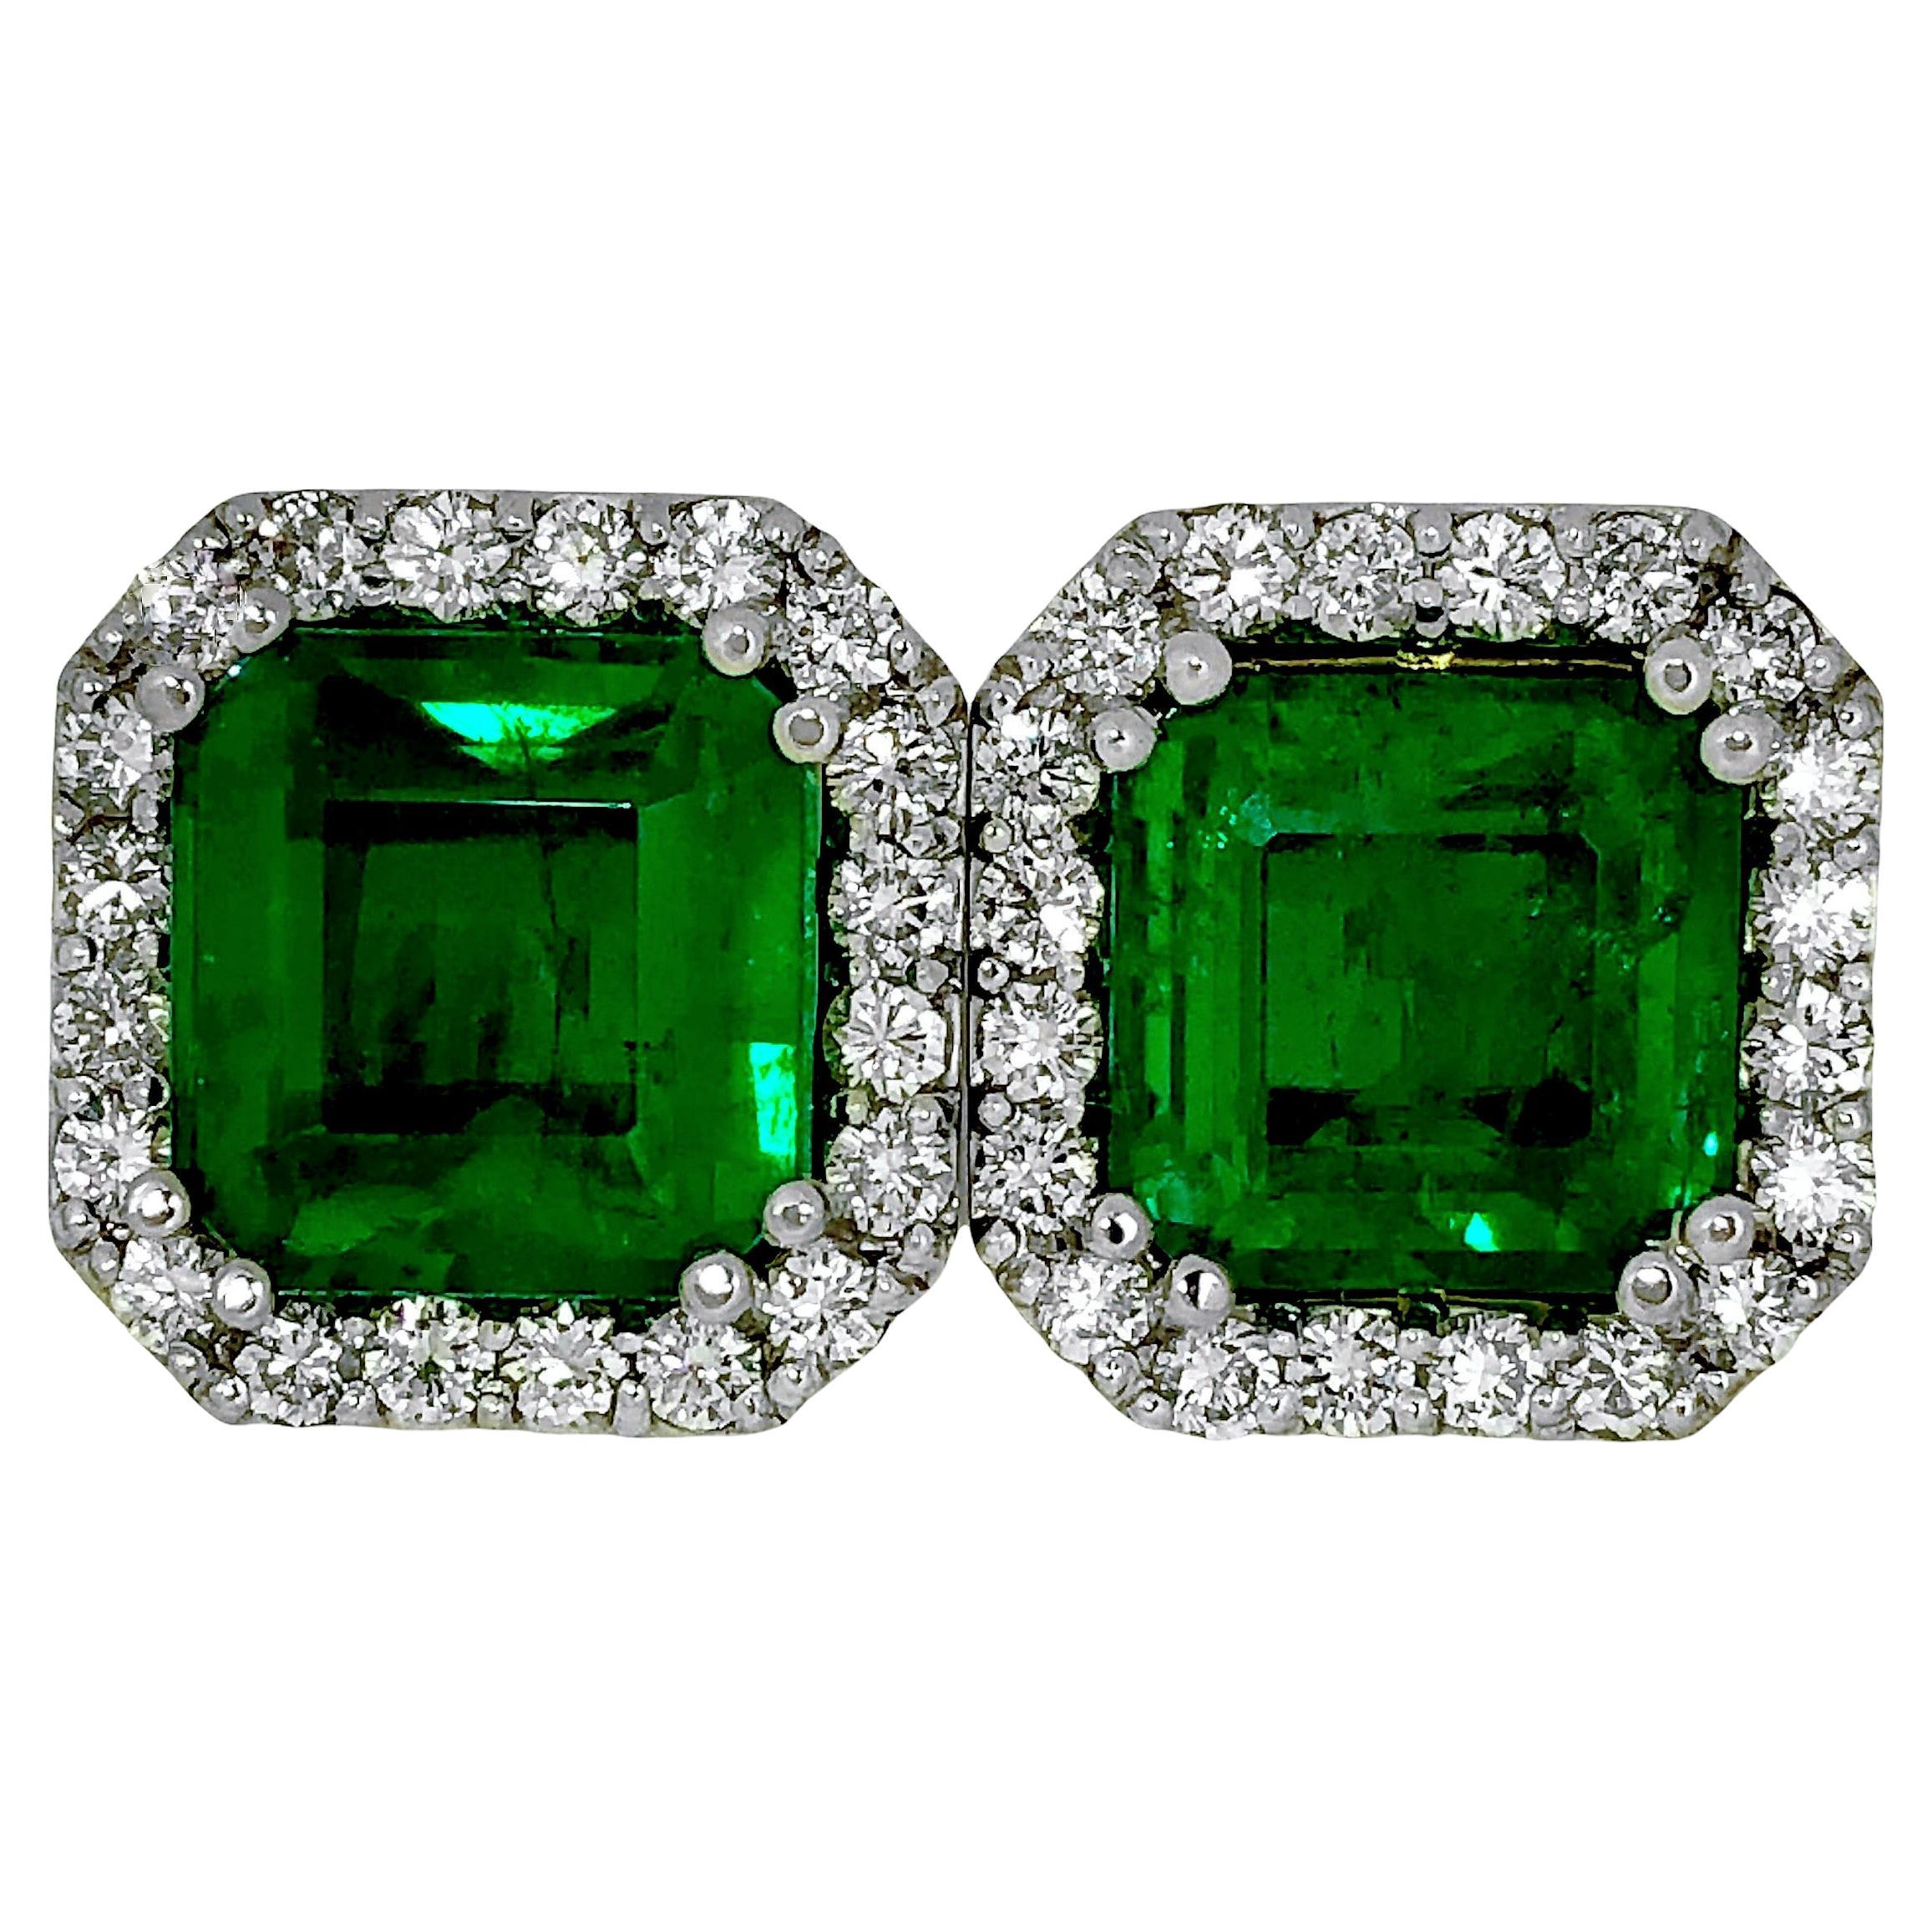 White Gold Zambian Emerald and Diamond Earrings with AGL Certificate